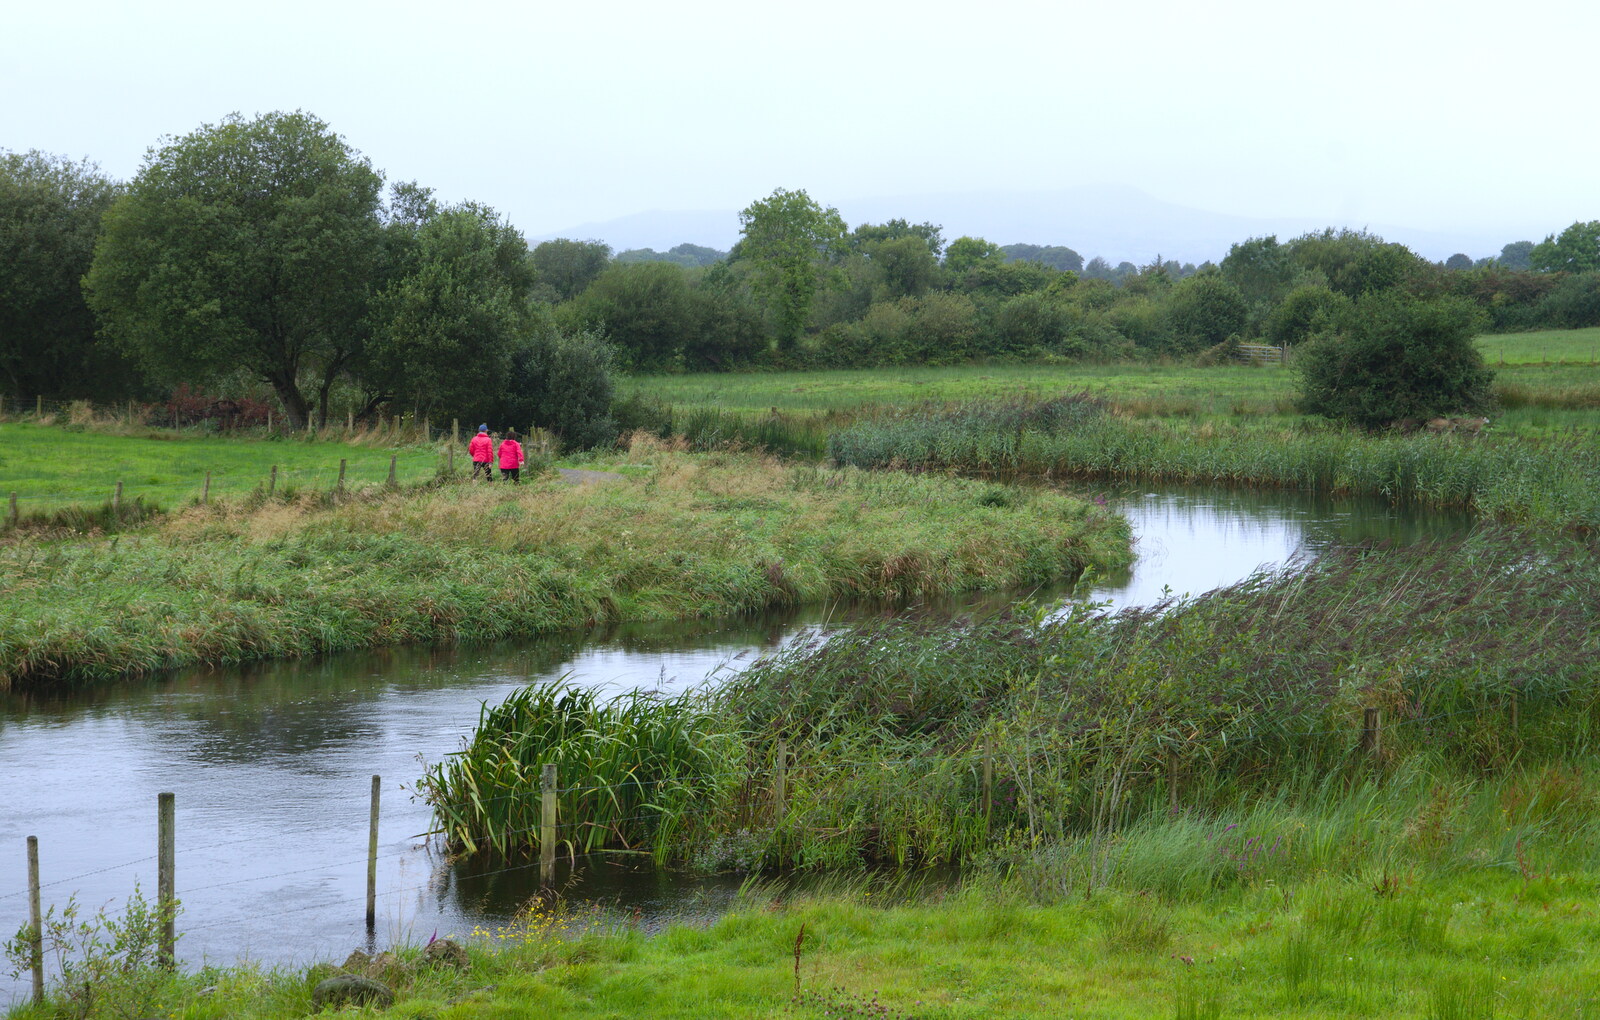 Two pink ladies walk along the Belcoo River from Travels in the Borderlands: An Blaic/Blacklion to Belcoo and back, Cavan and Fermanagh, Ireland - 22nd August 2019